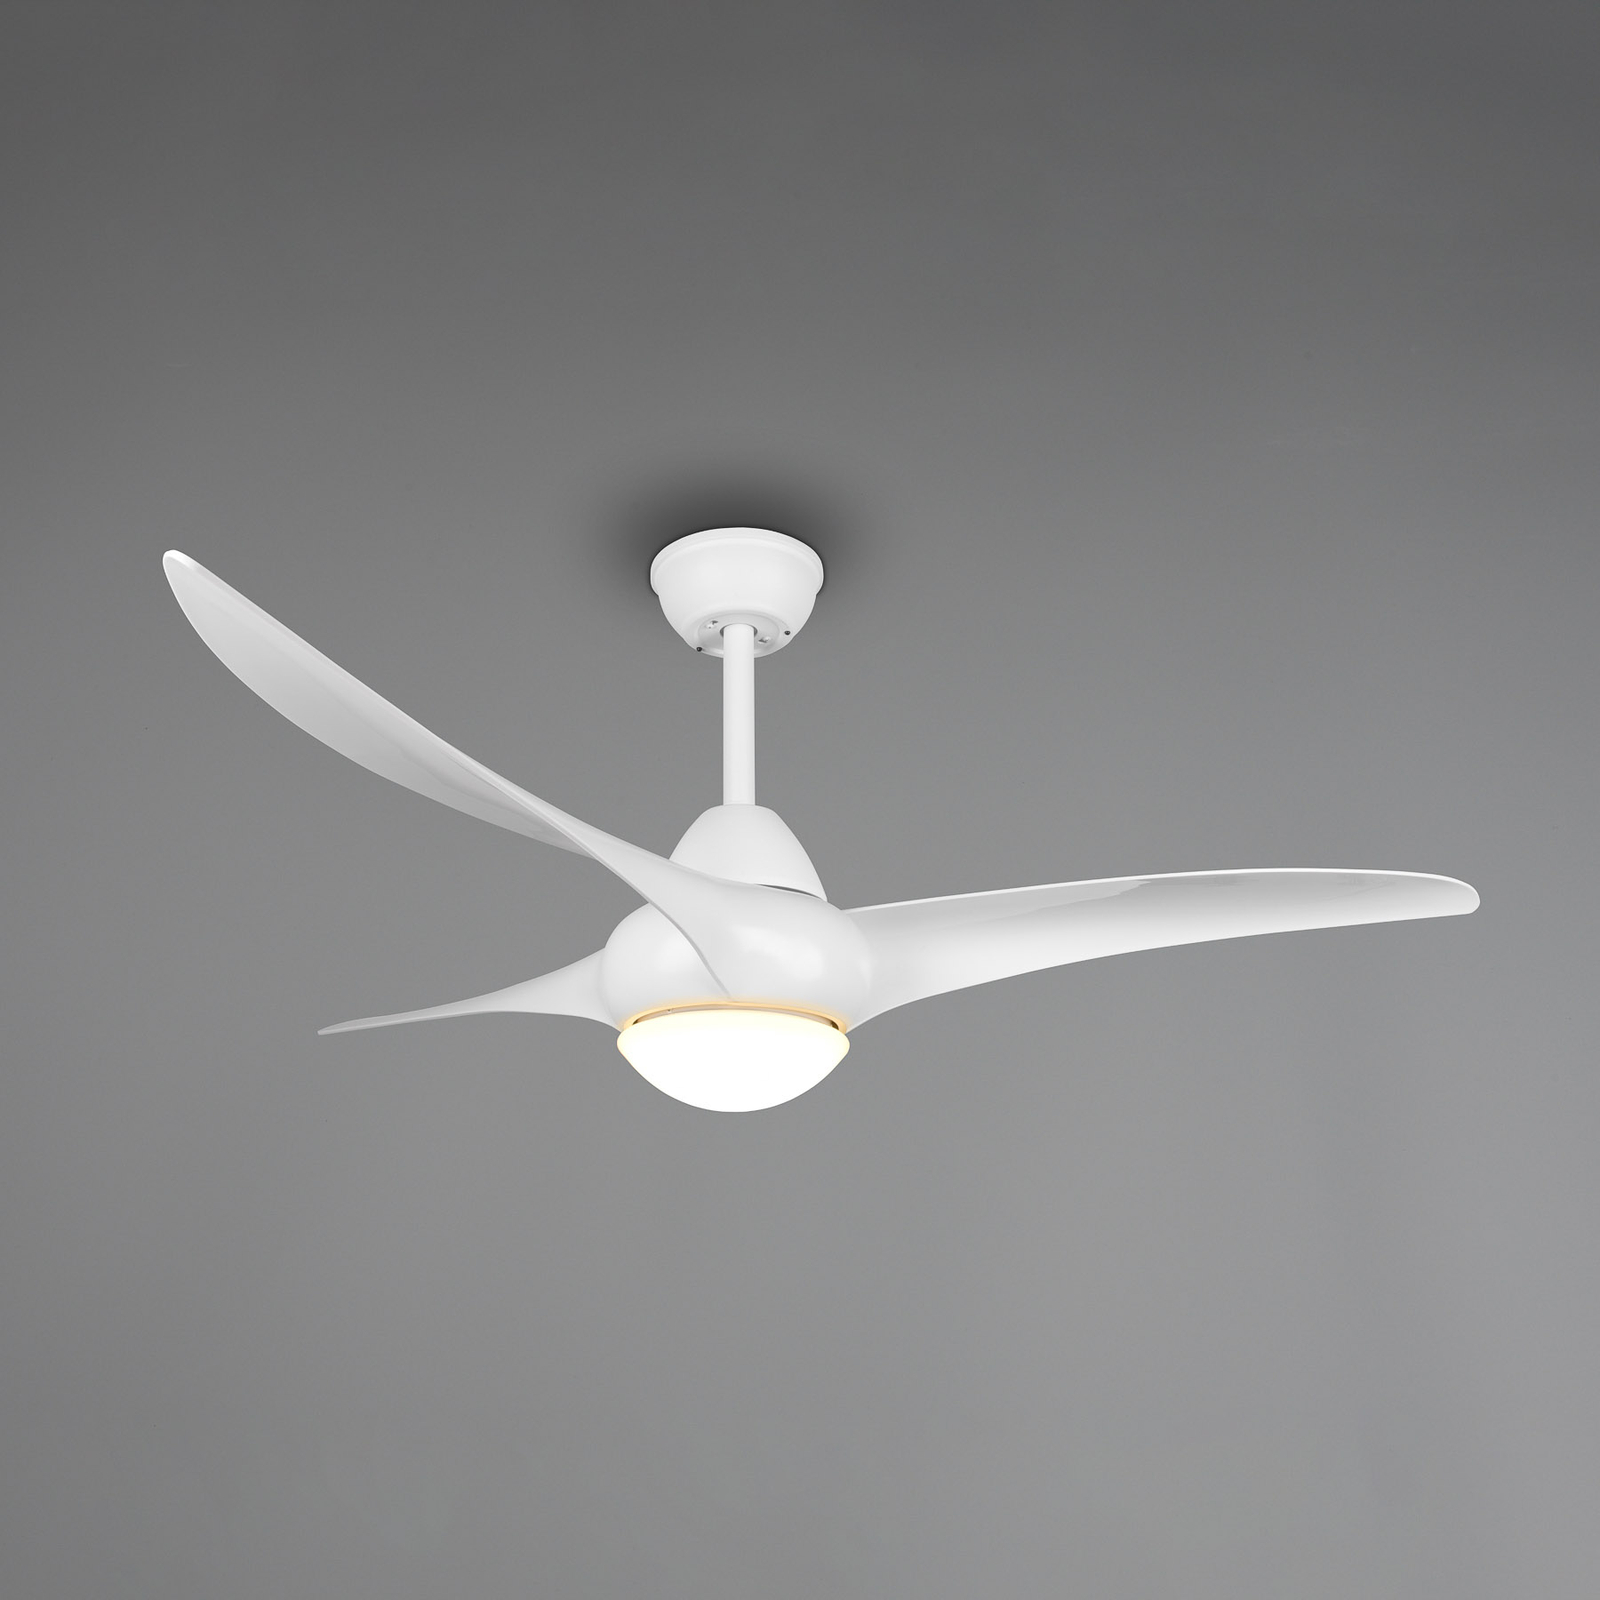 Alesund LED fan with a remote control, white